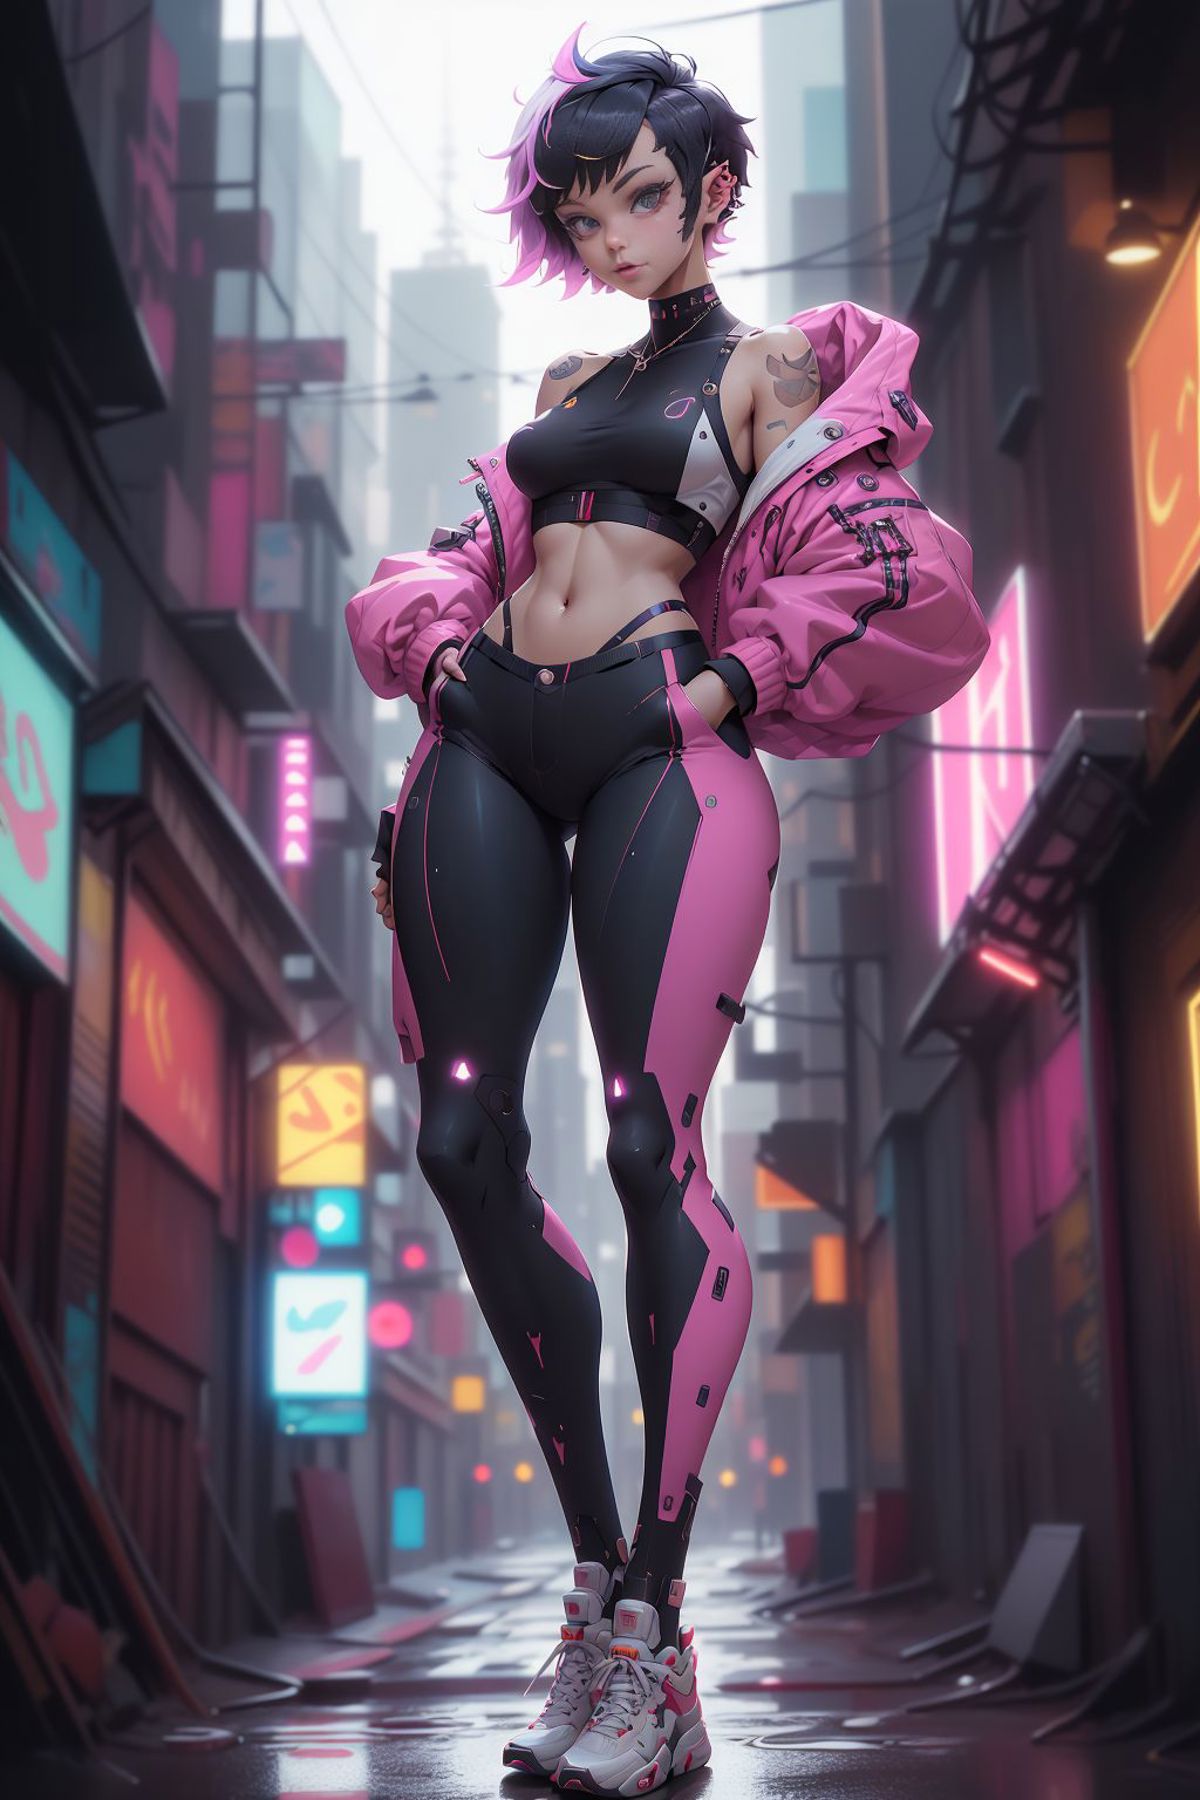 cyber style girl image by ChaosOrchestrator